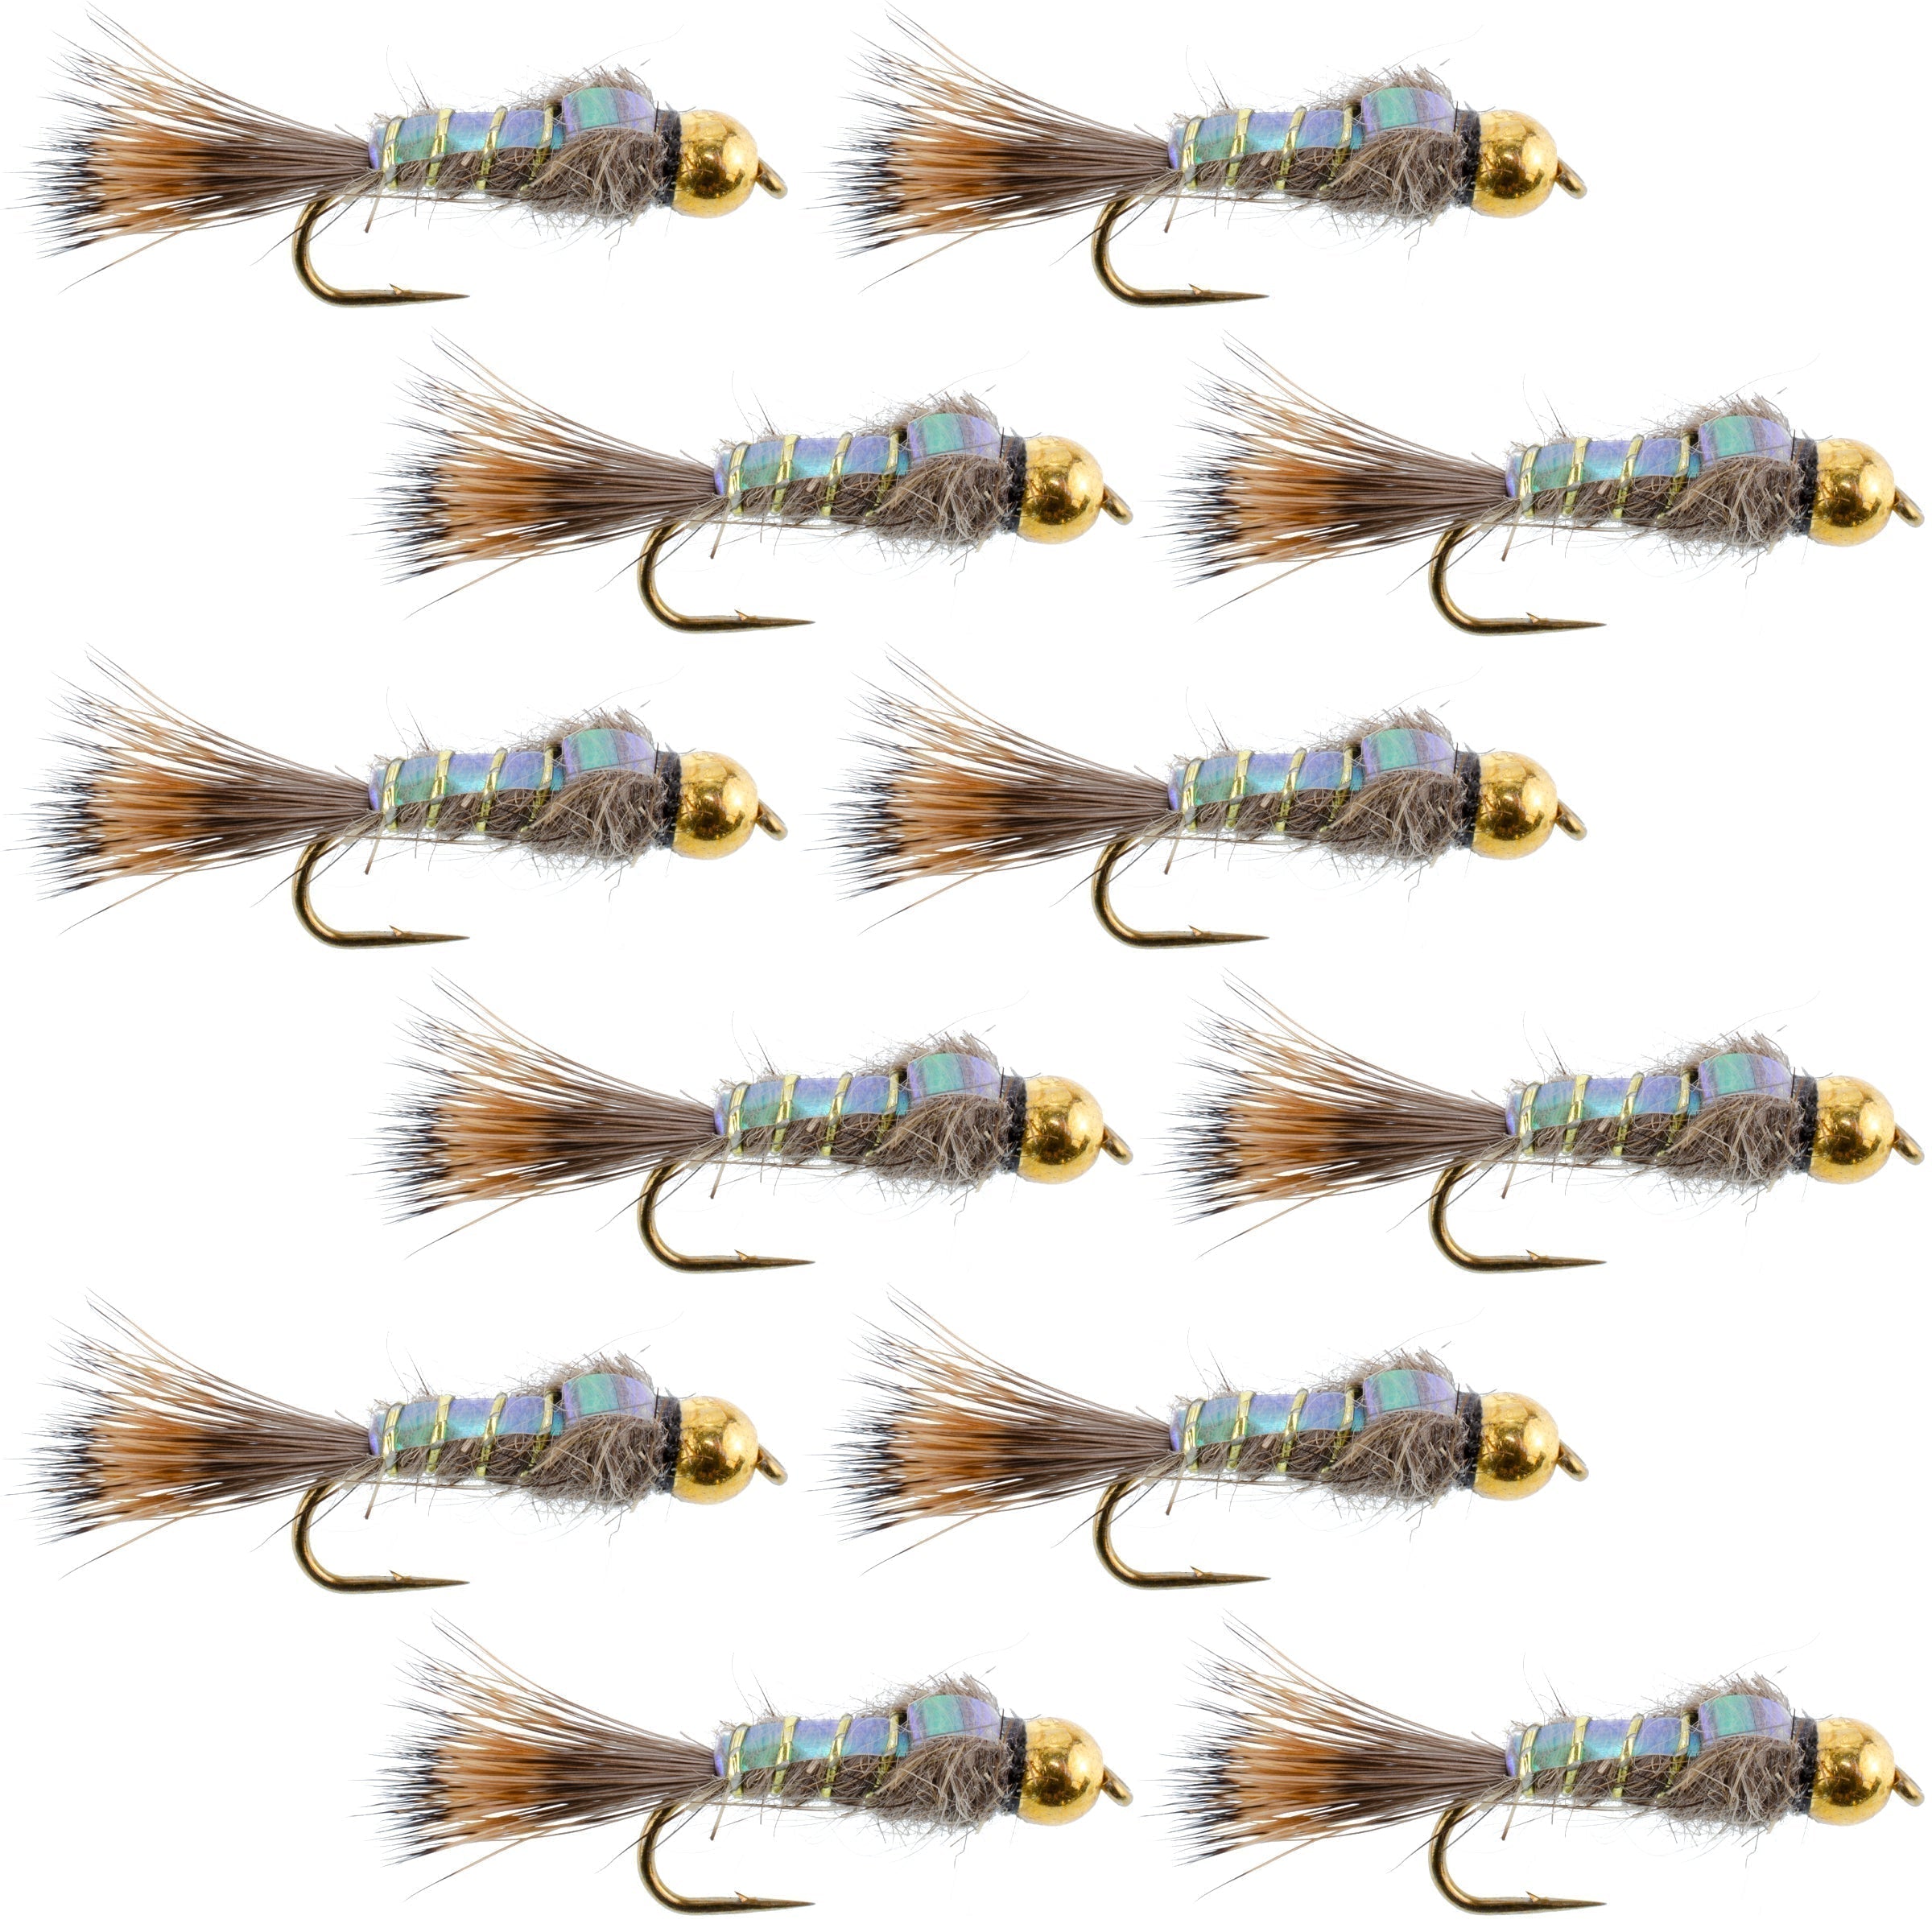 Tungsten Bead Flashback Gold Ribbed Hare's Ear Trout Fly 1 Dozen Nymph Wet Flies Size 12